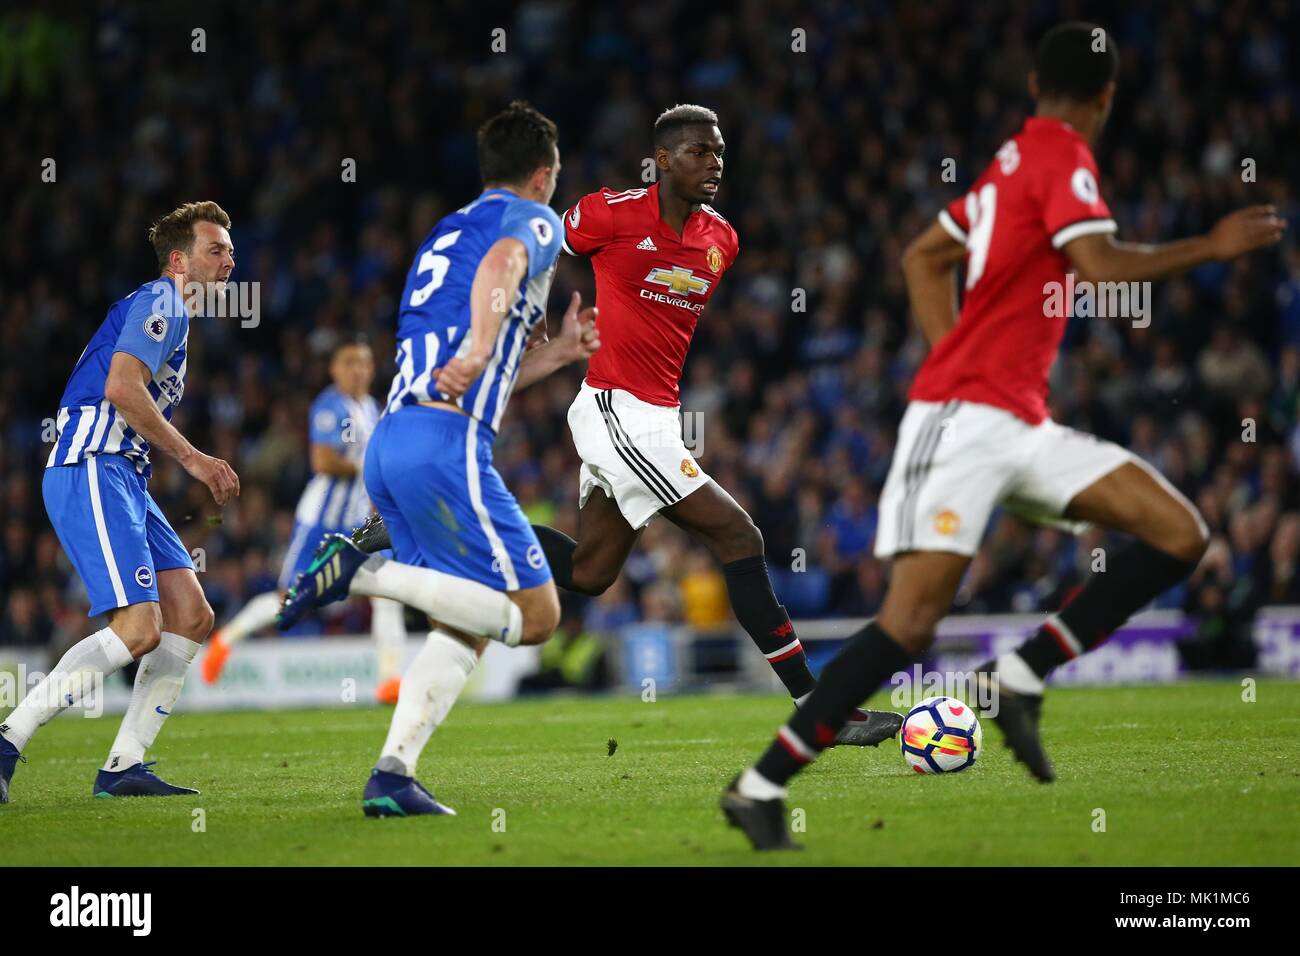 Paul Pogba of Manchester United during the Premier League match between Brighton and Hove Albion and Manchester United at the American Express Community Stadium in Brighton and Hove. 04 May 2018 *** EDITORIAL USE ONLY ***  No merchandising. For Football images FA and Premier League restrictions apply inc. no internet/mobile usage without FAPL license - for details contact Football Dataco Stock Photo